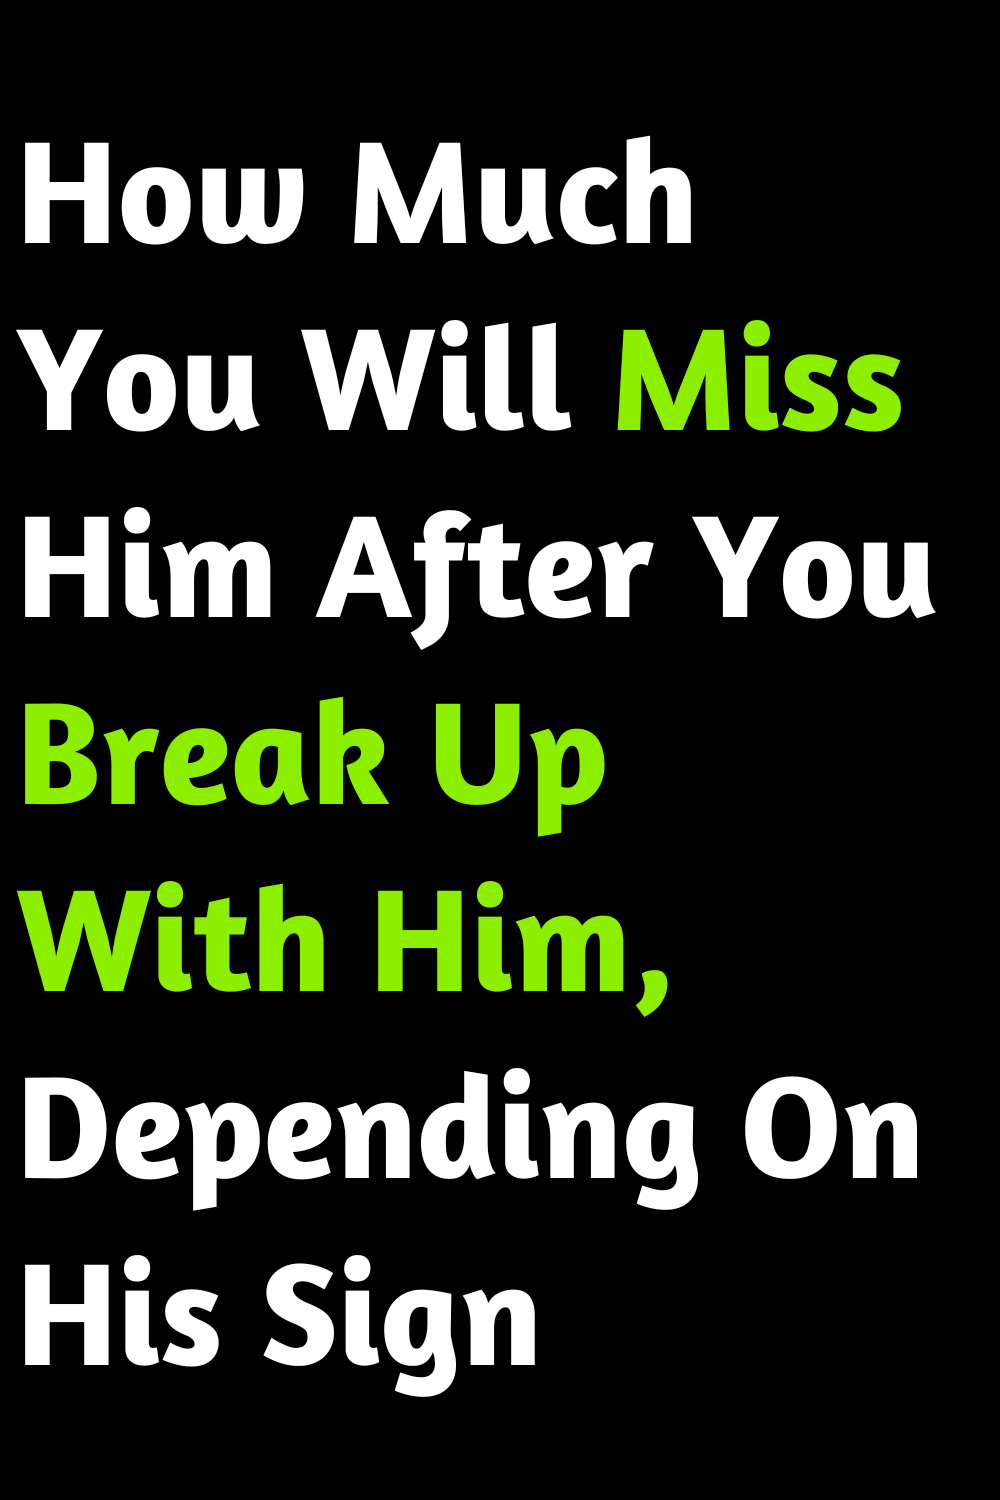 How Much You Will Miss Him After You Break Up With Him, Depending On His Sign